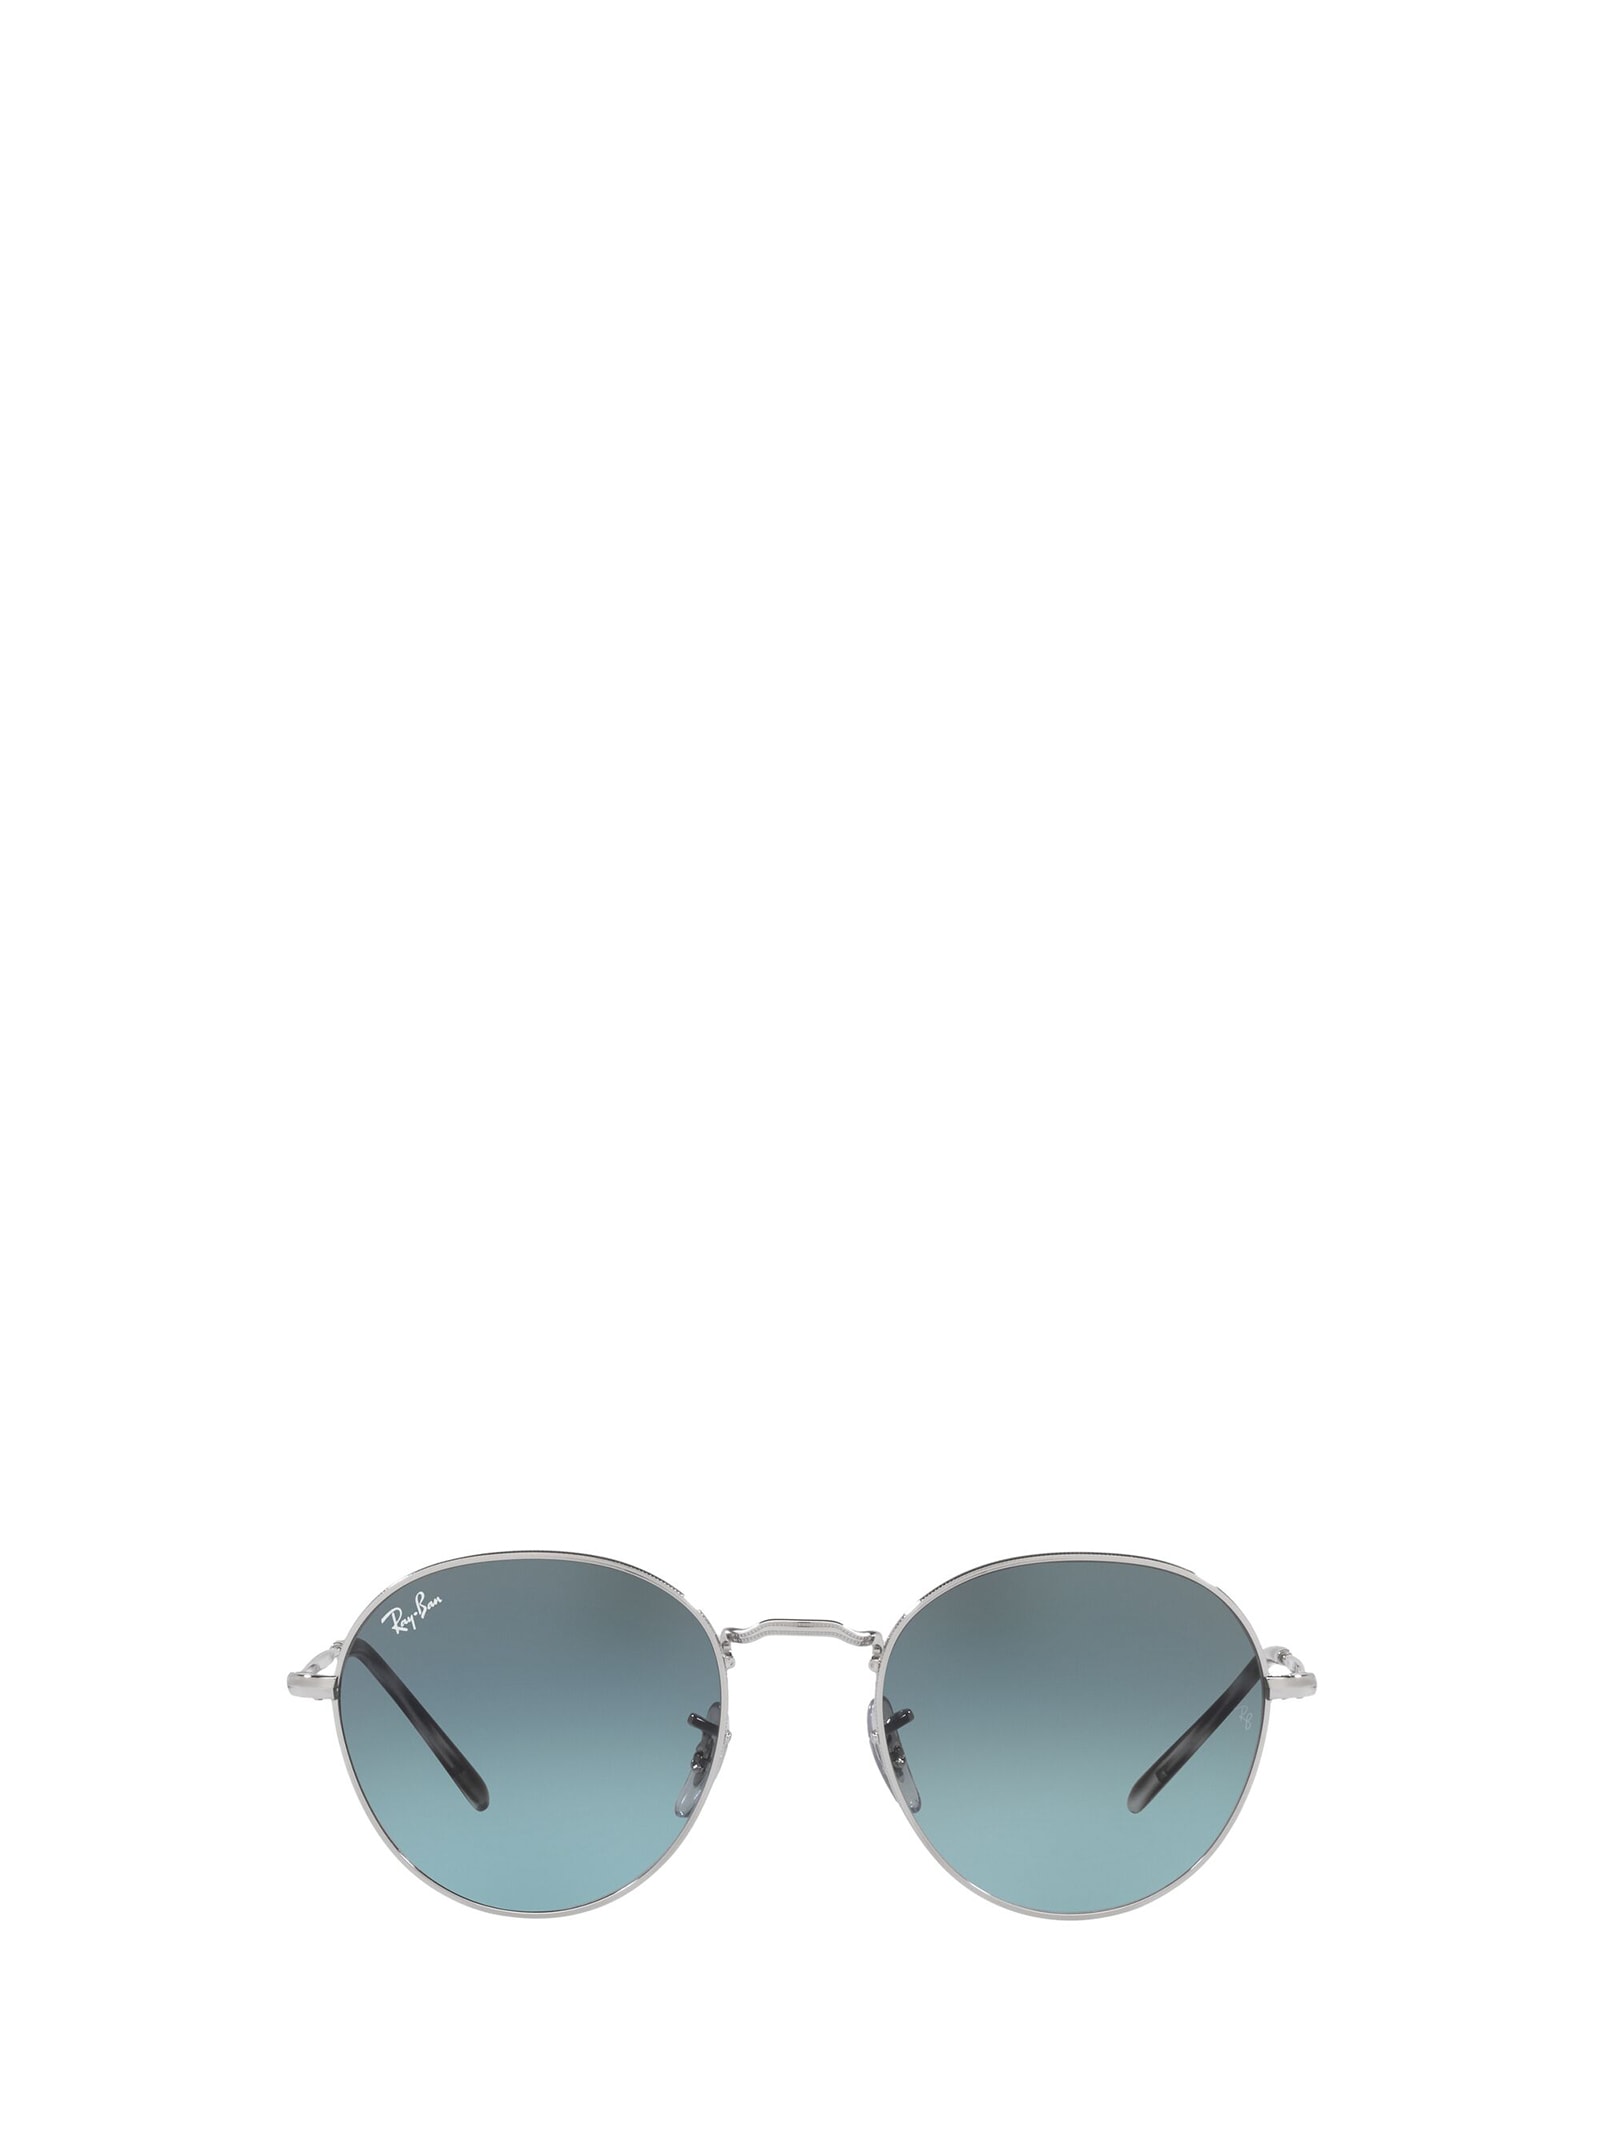 Ray-Ban Rb3582 Silver Sunglasses